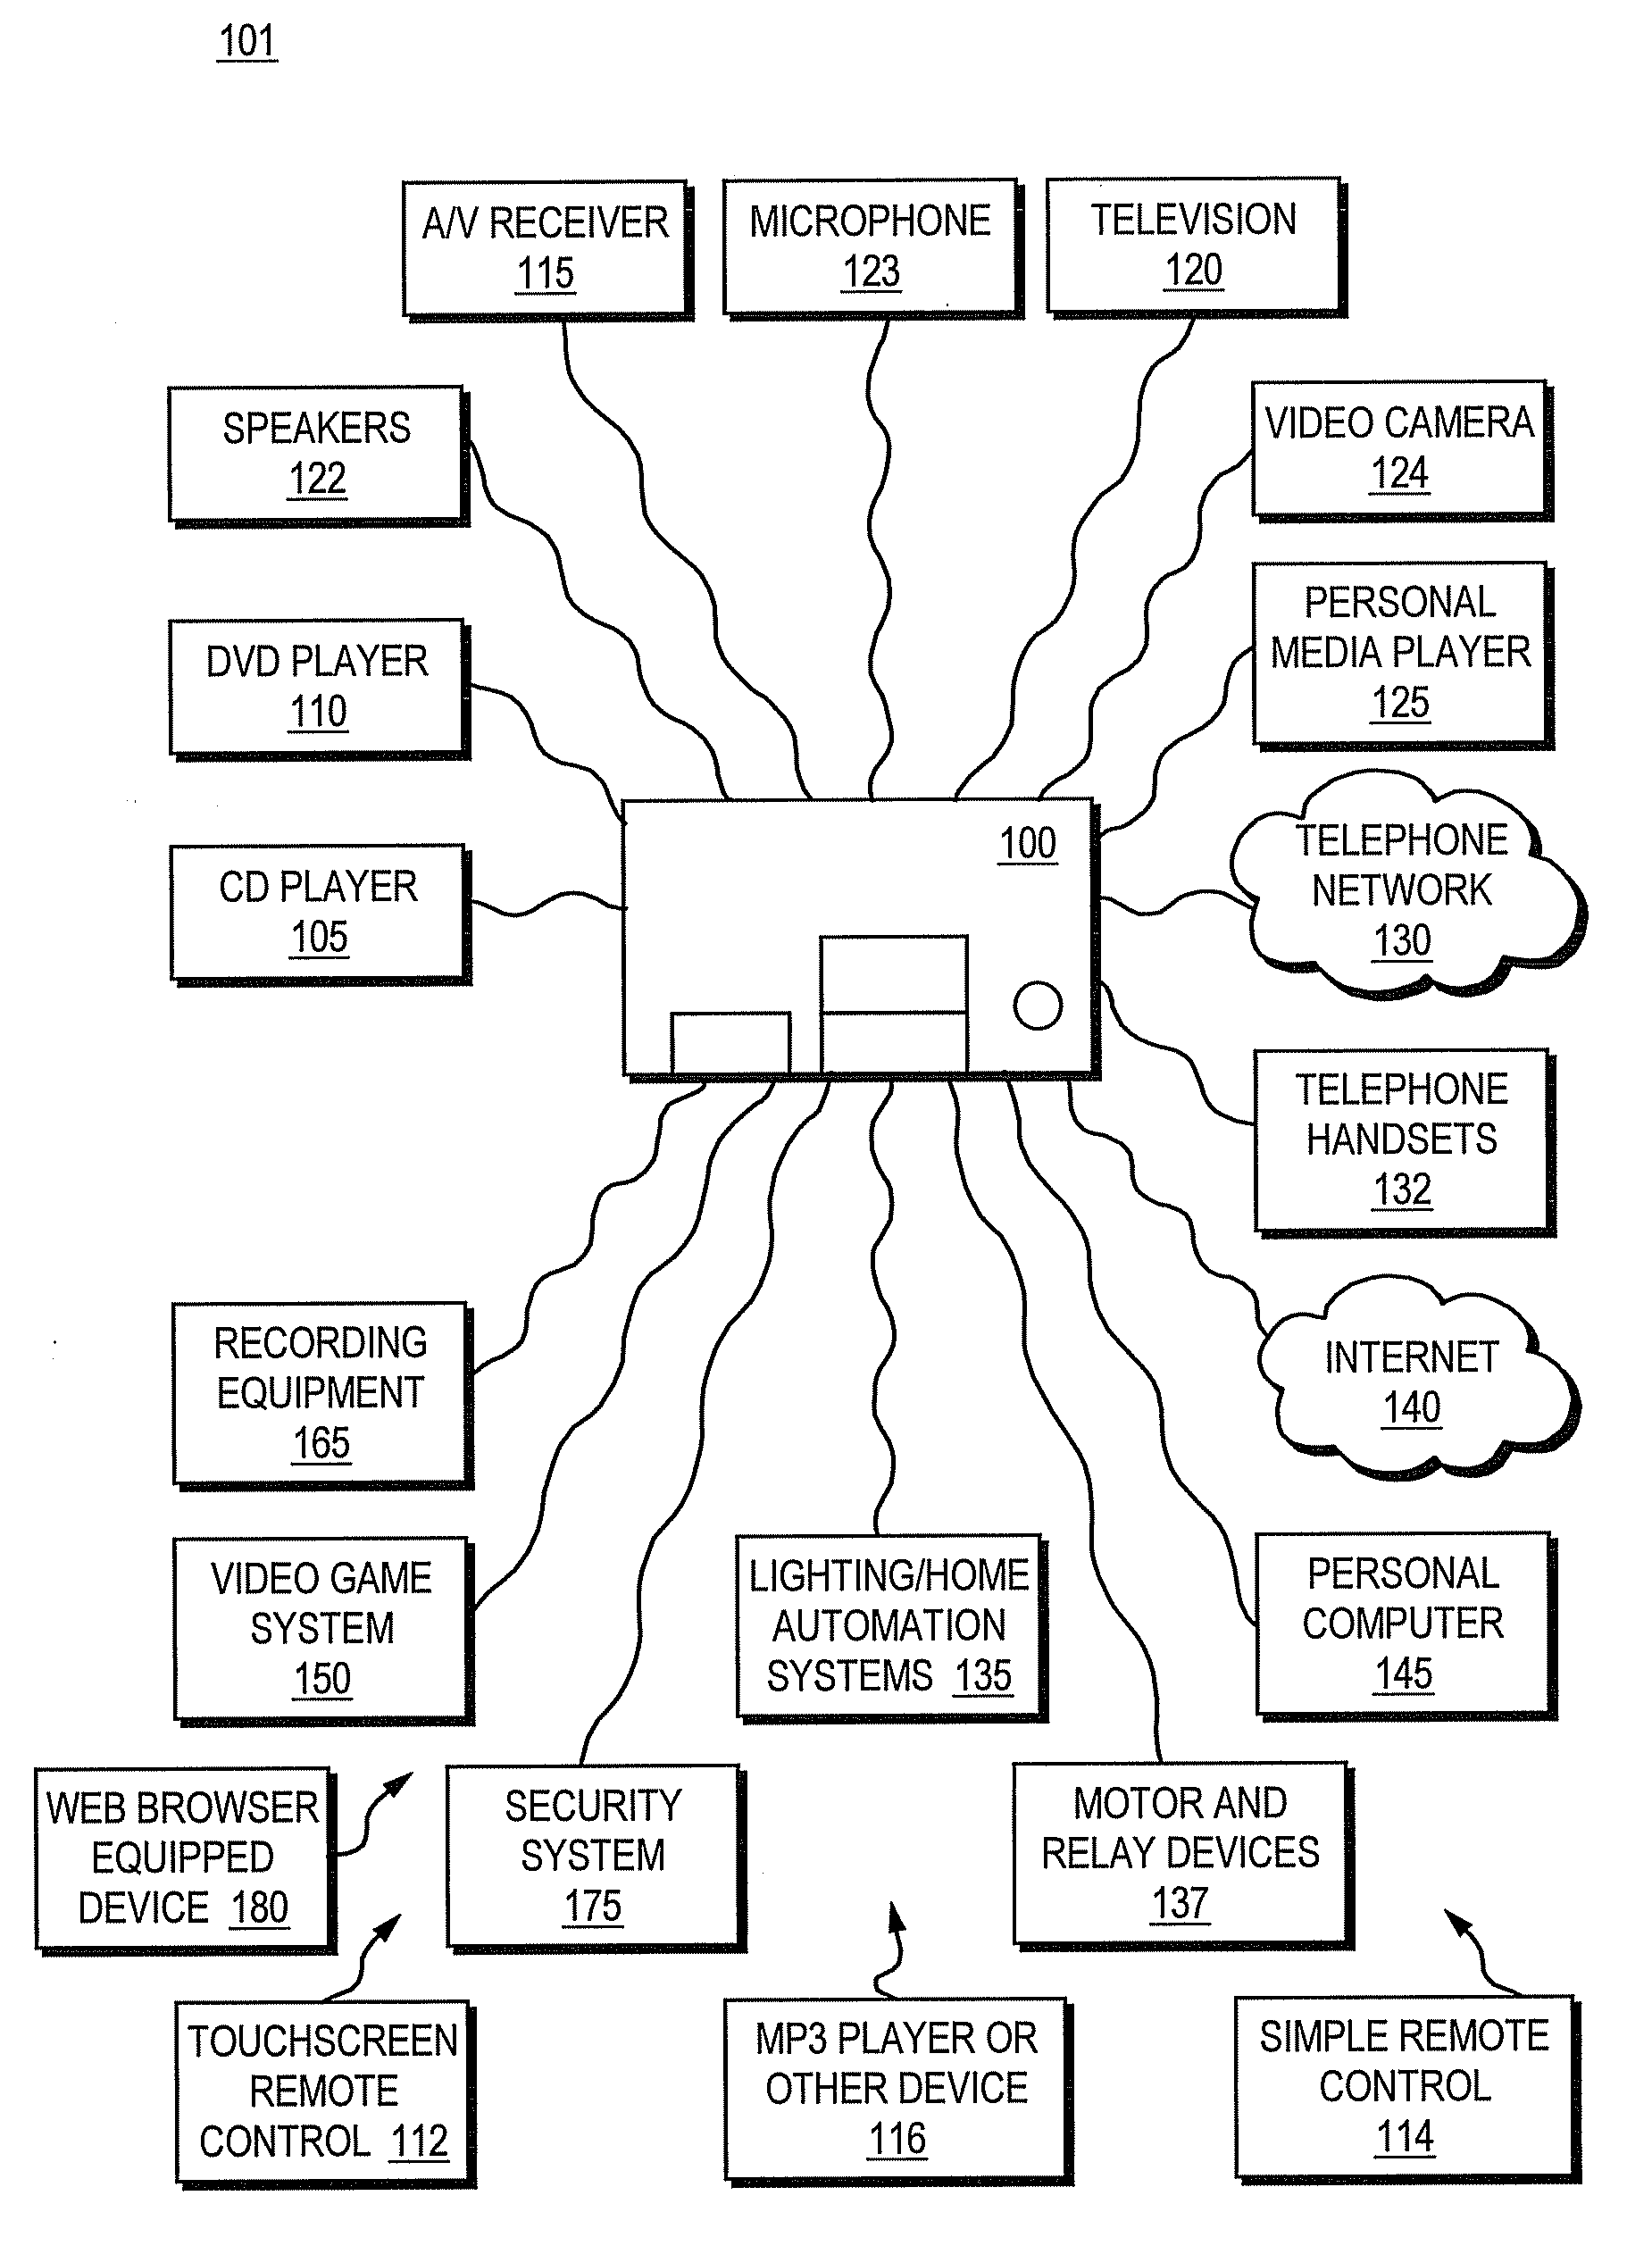 Web browser based remote control for programmable multimedia controller